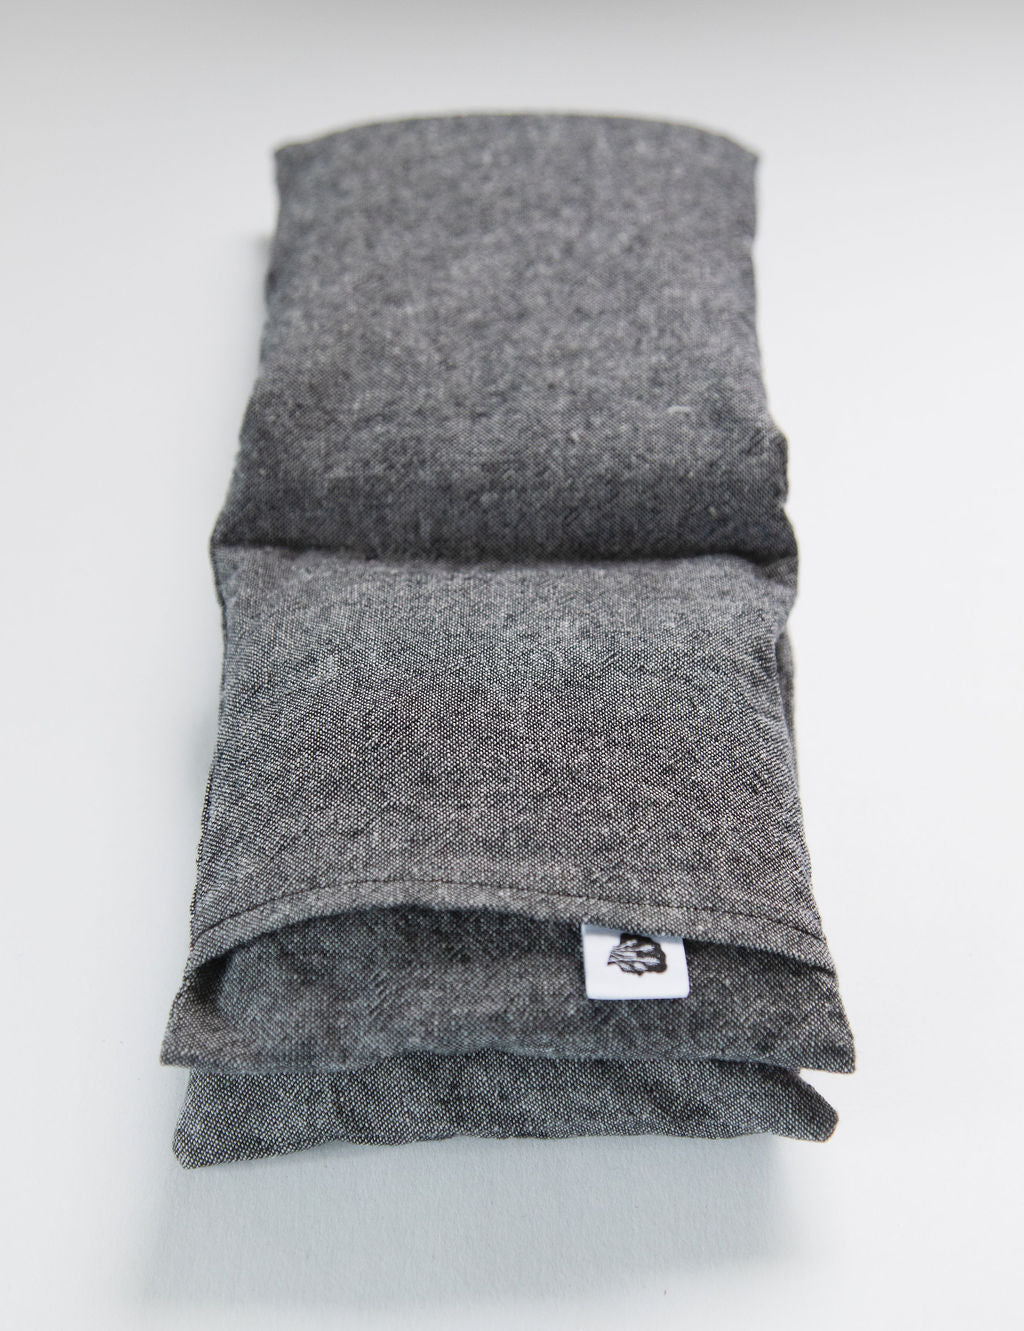 Charcoal linen wrap folded on white with TLC tag